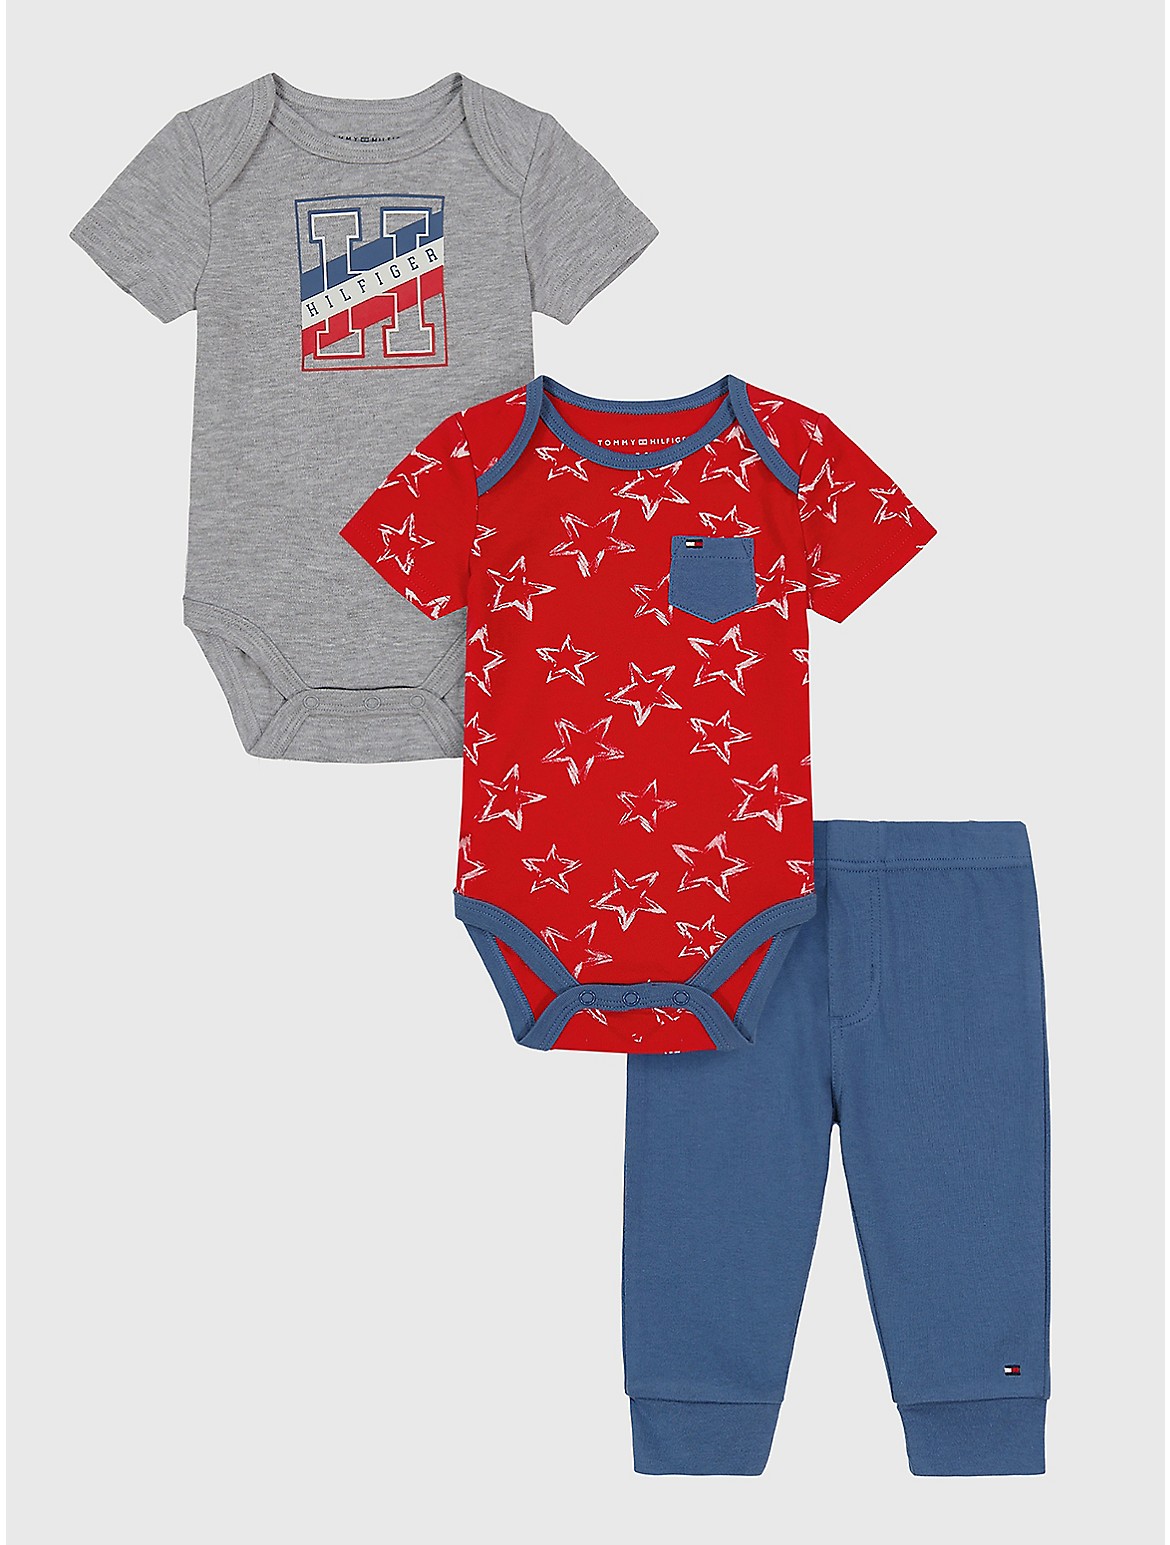 Tommy Hilfiger Boys' Toddlers' Onesie and Pant Set 3PC - Multi - 12M